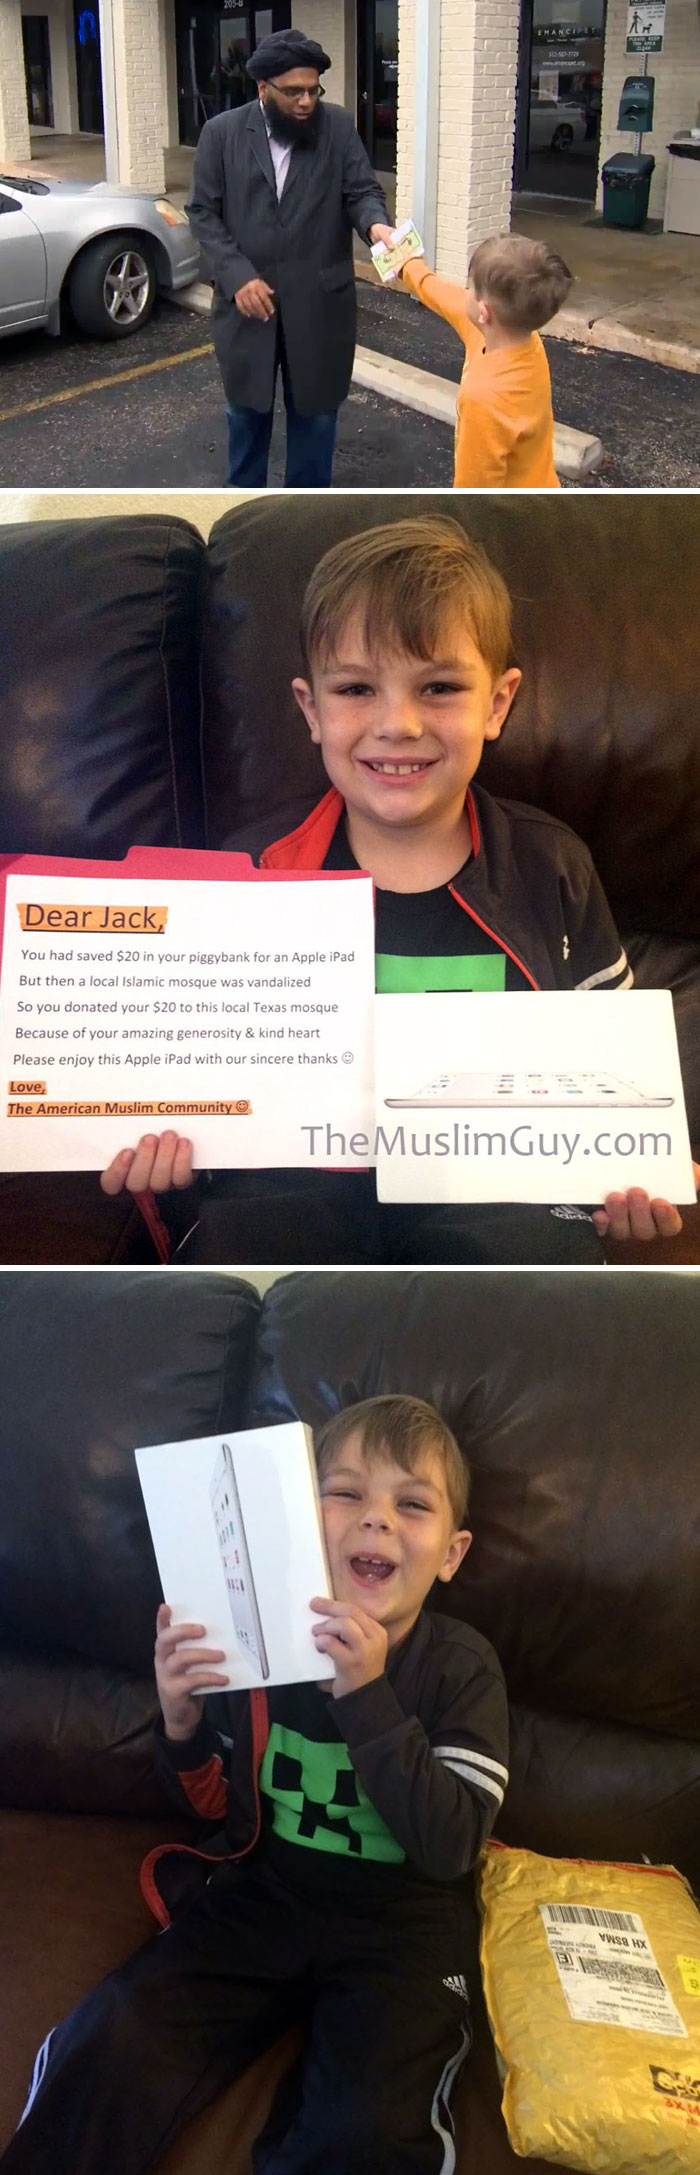 7-Year-Old Boy Donates $20 From Piggy Bank To Help Vandalized Mosque. Wanted Apple iPad. So He Got One